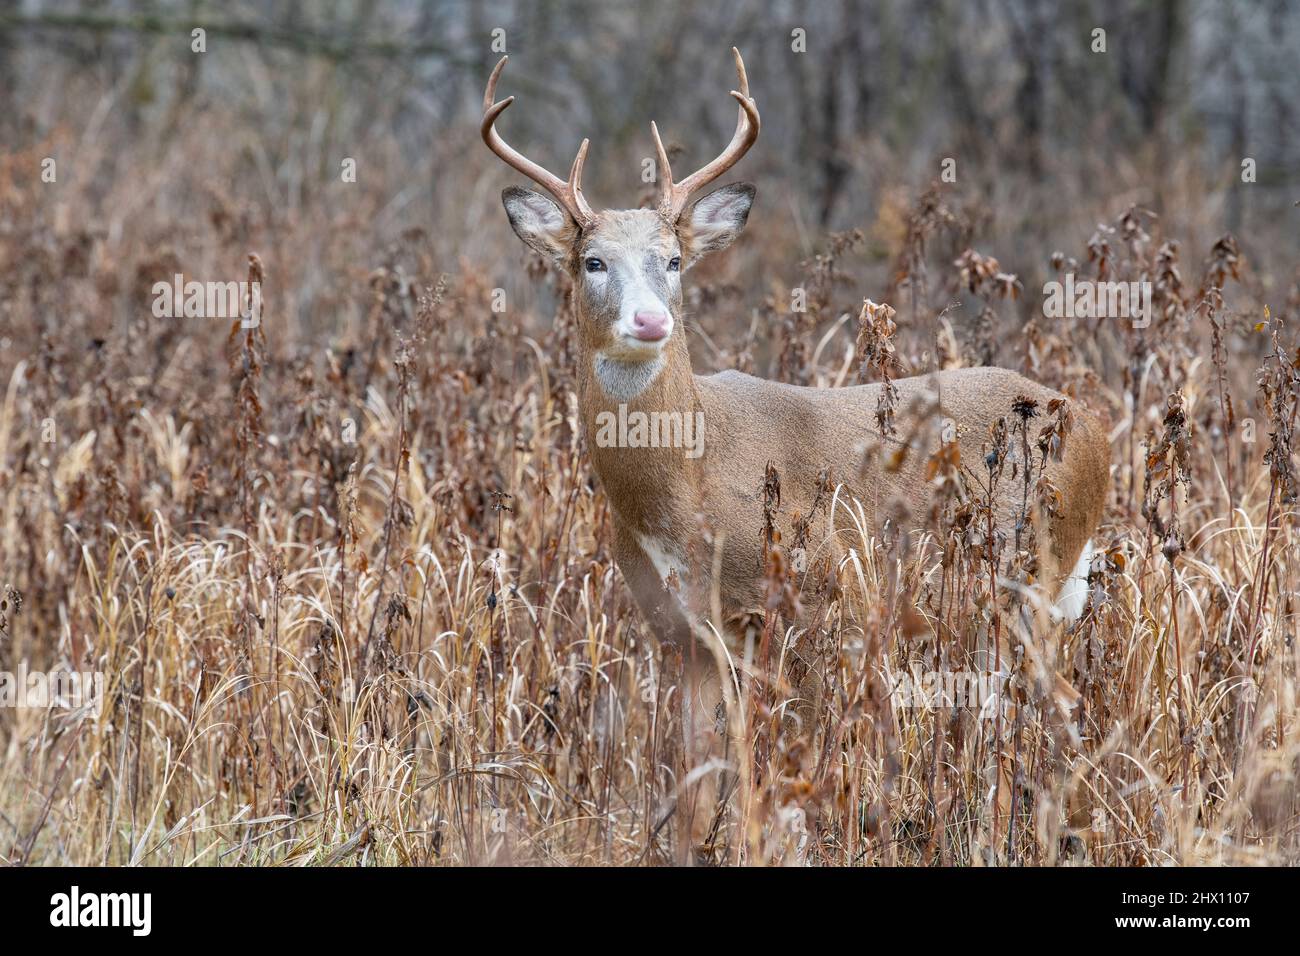 Piebald white-tailed deer (Odocoileus virginianus). Fort Snelling state park, Minnesota. Early December. Stock Photo